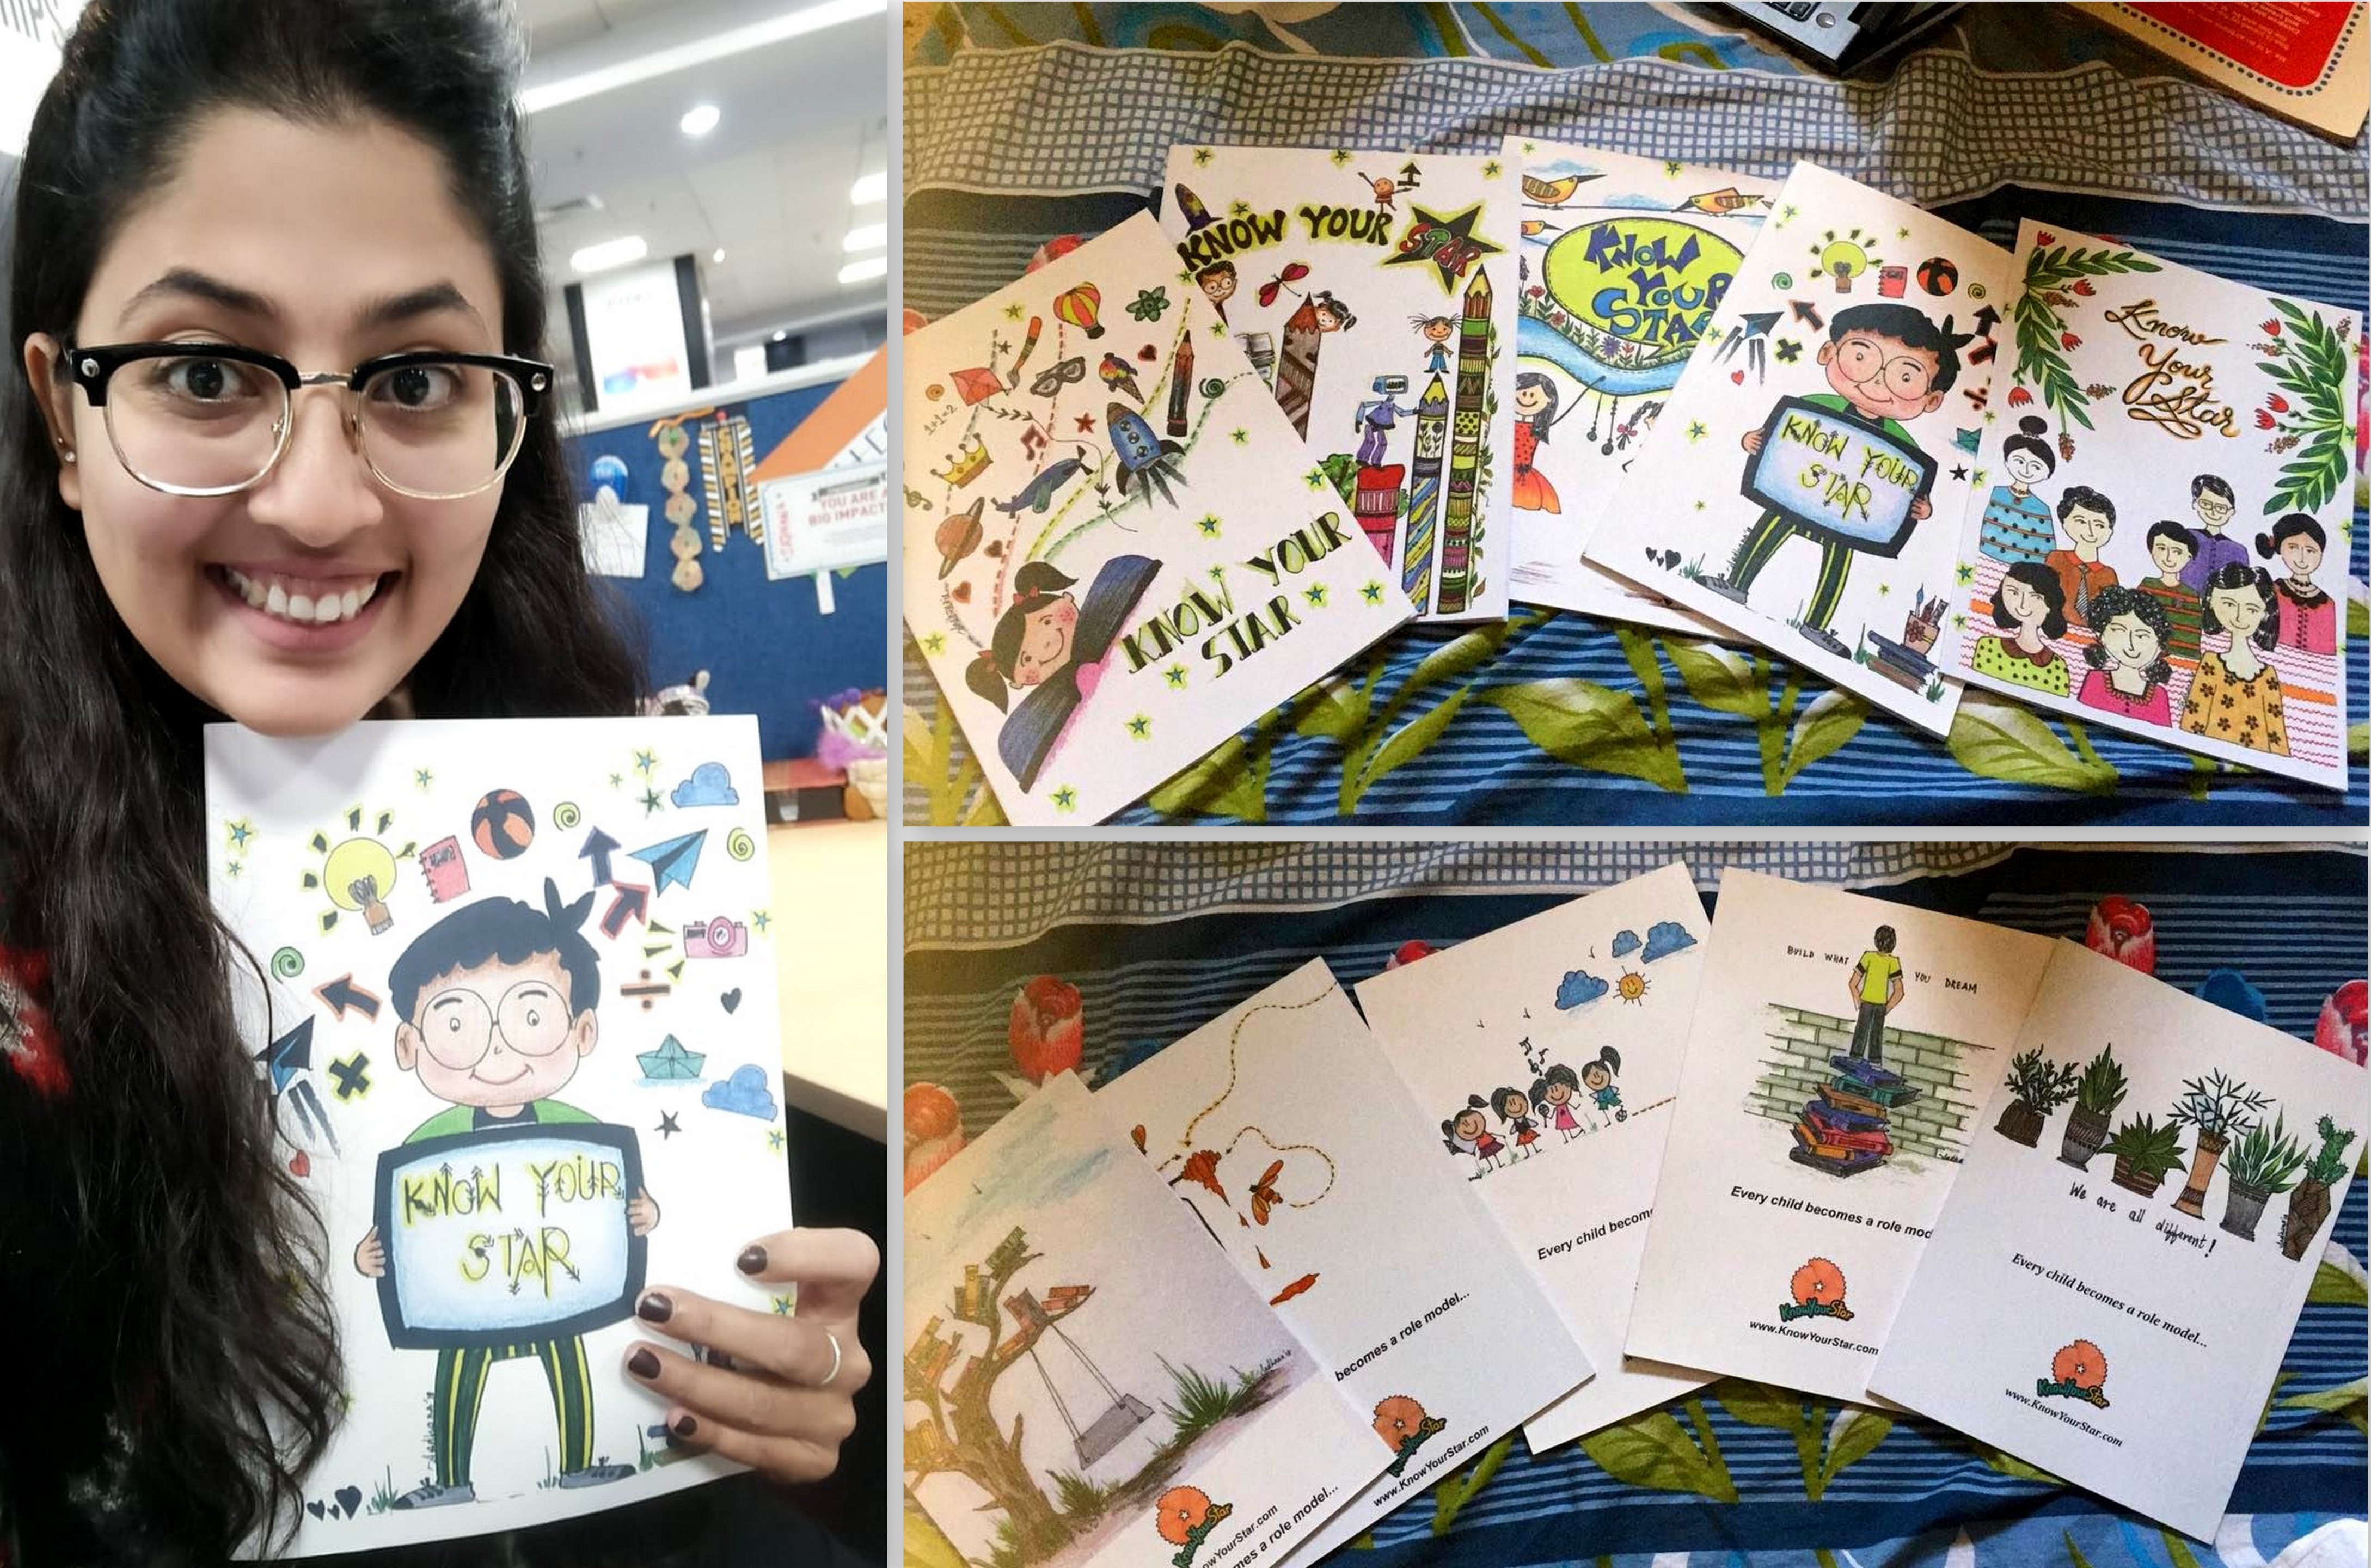 Sadhana Konnur – A Volunteer Artist’s Journey Of Illustrating For The Know Your Star Book Series